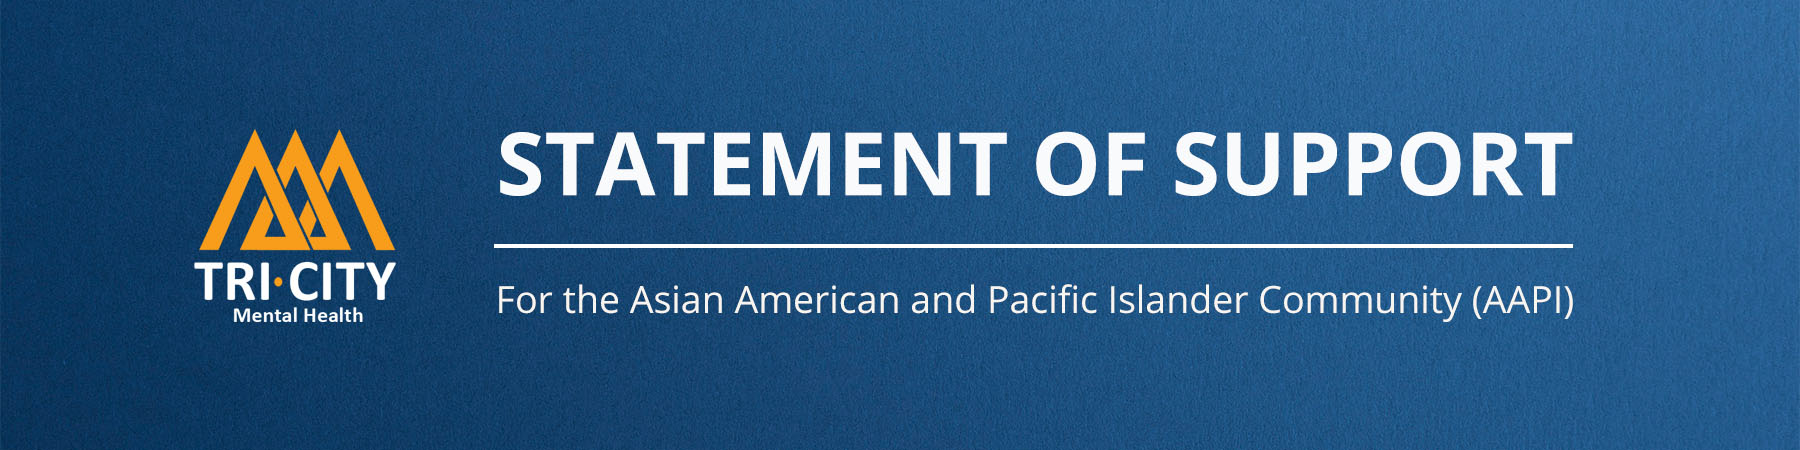 Statement of Support for the Asian American and Pacific Islander (AAPI) Community